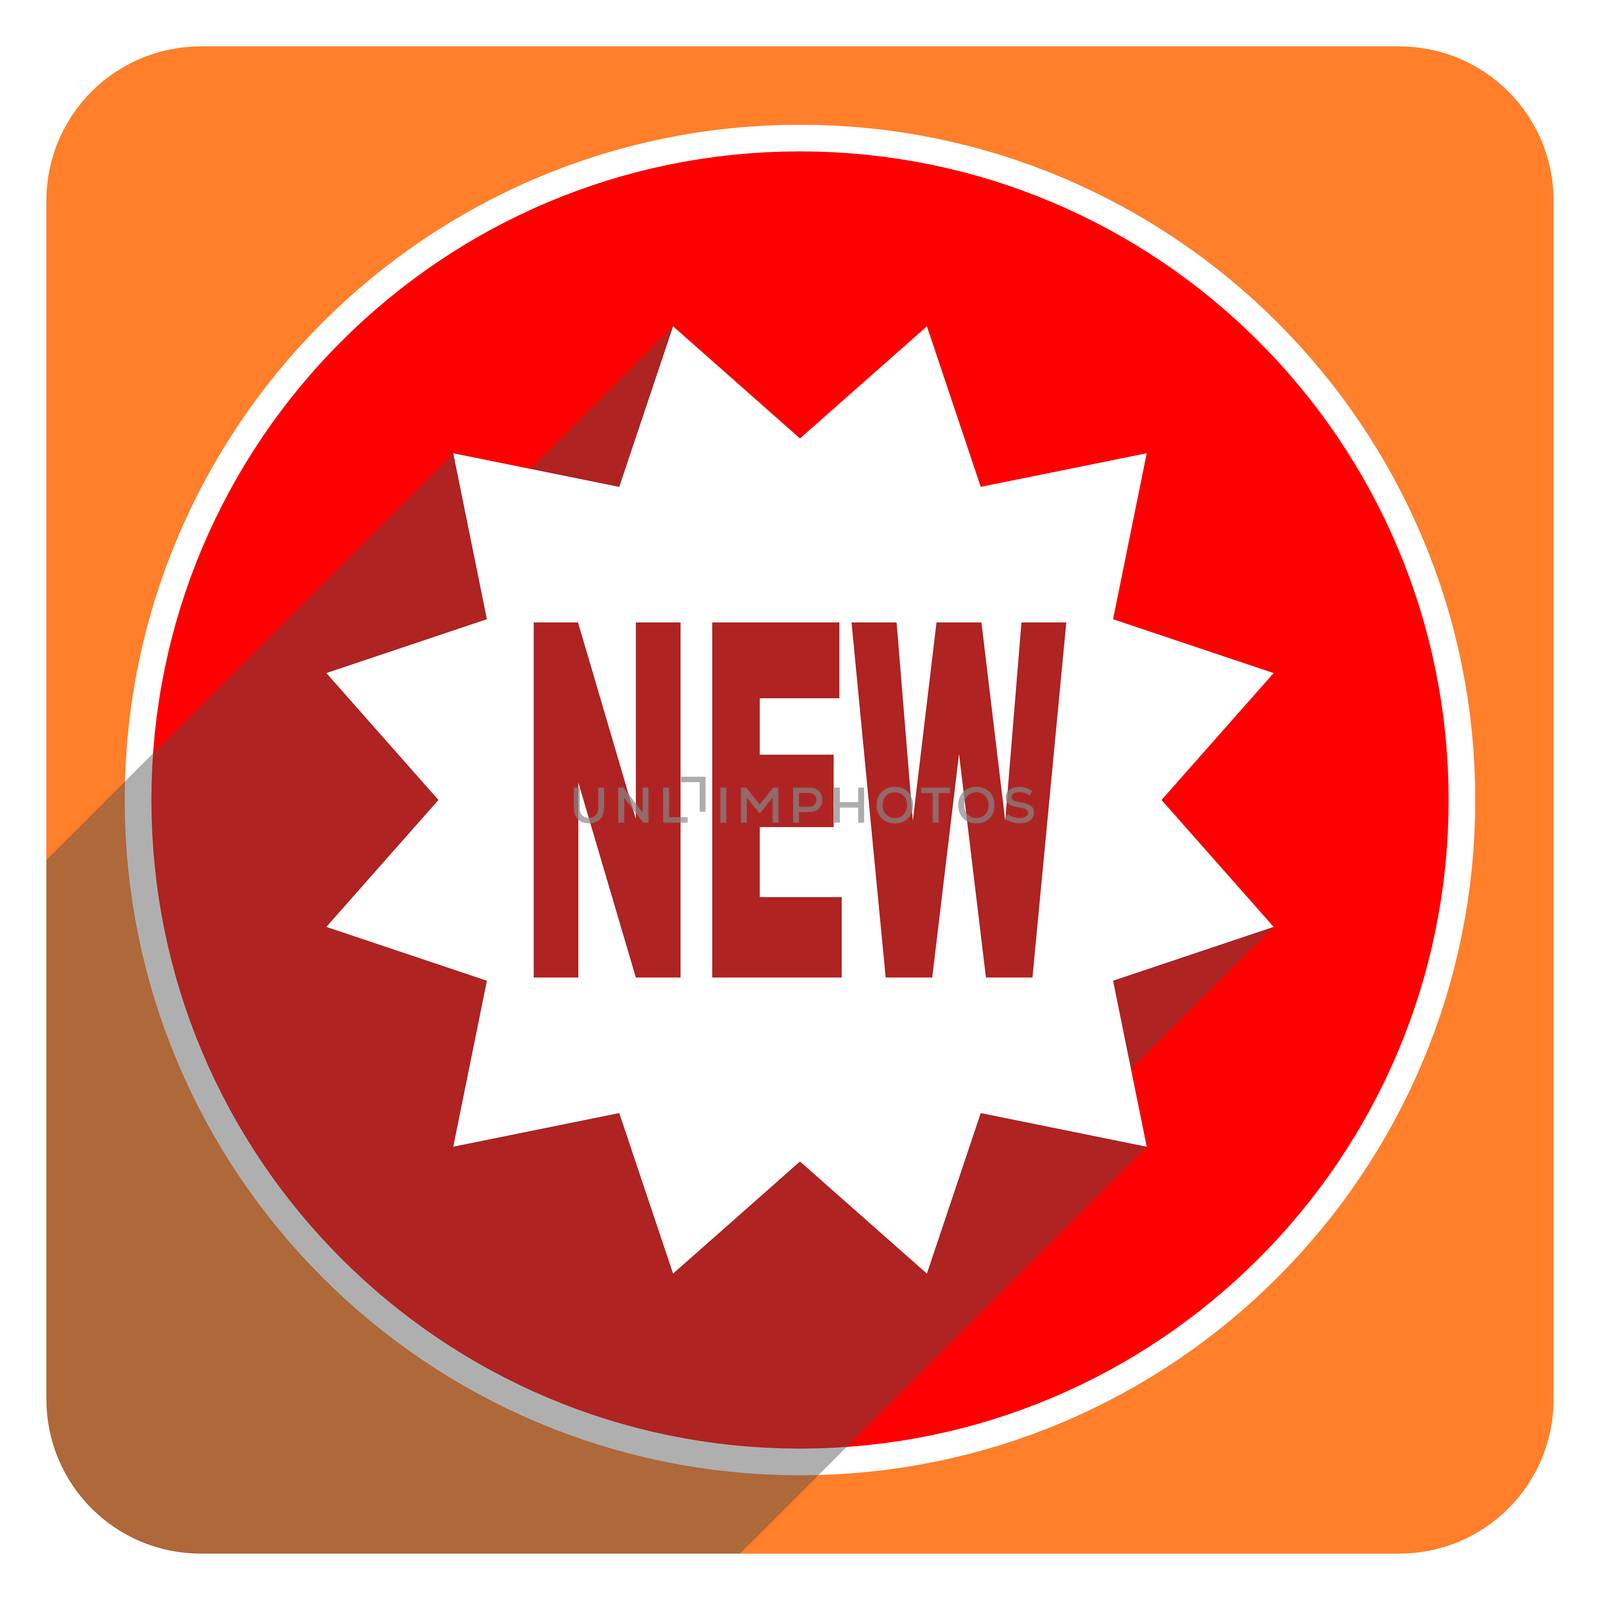 new red flat icon isolated